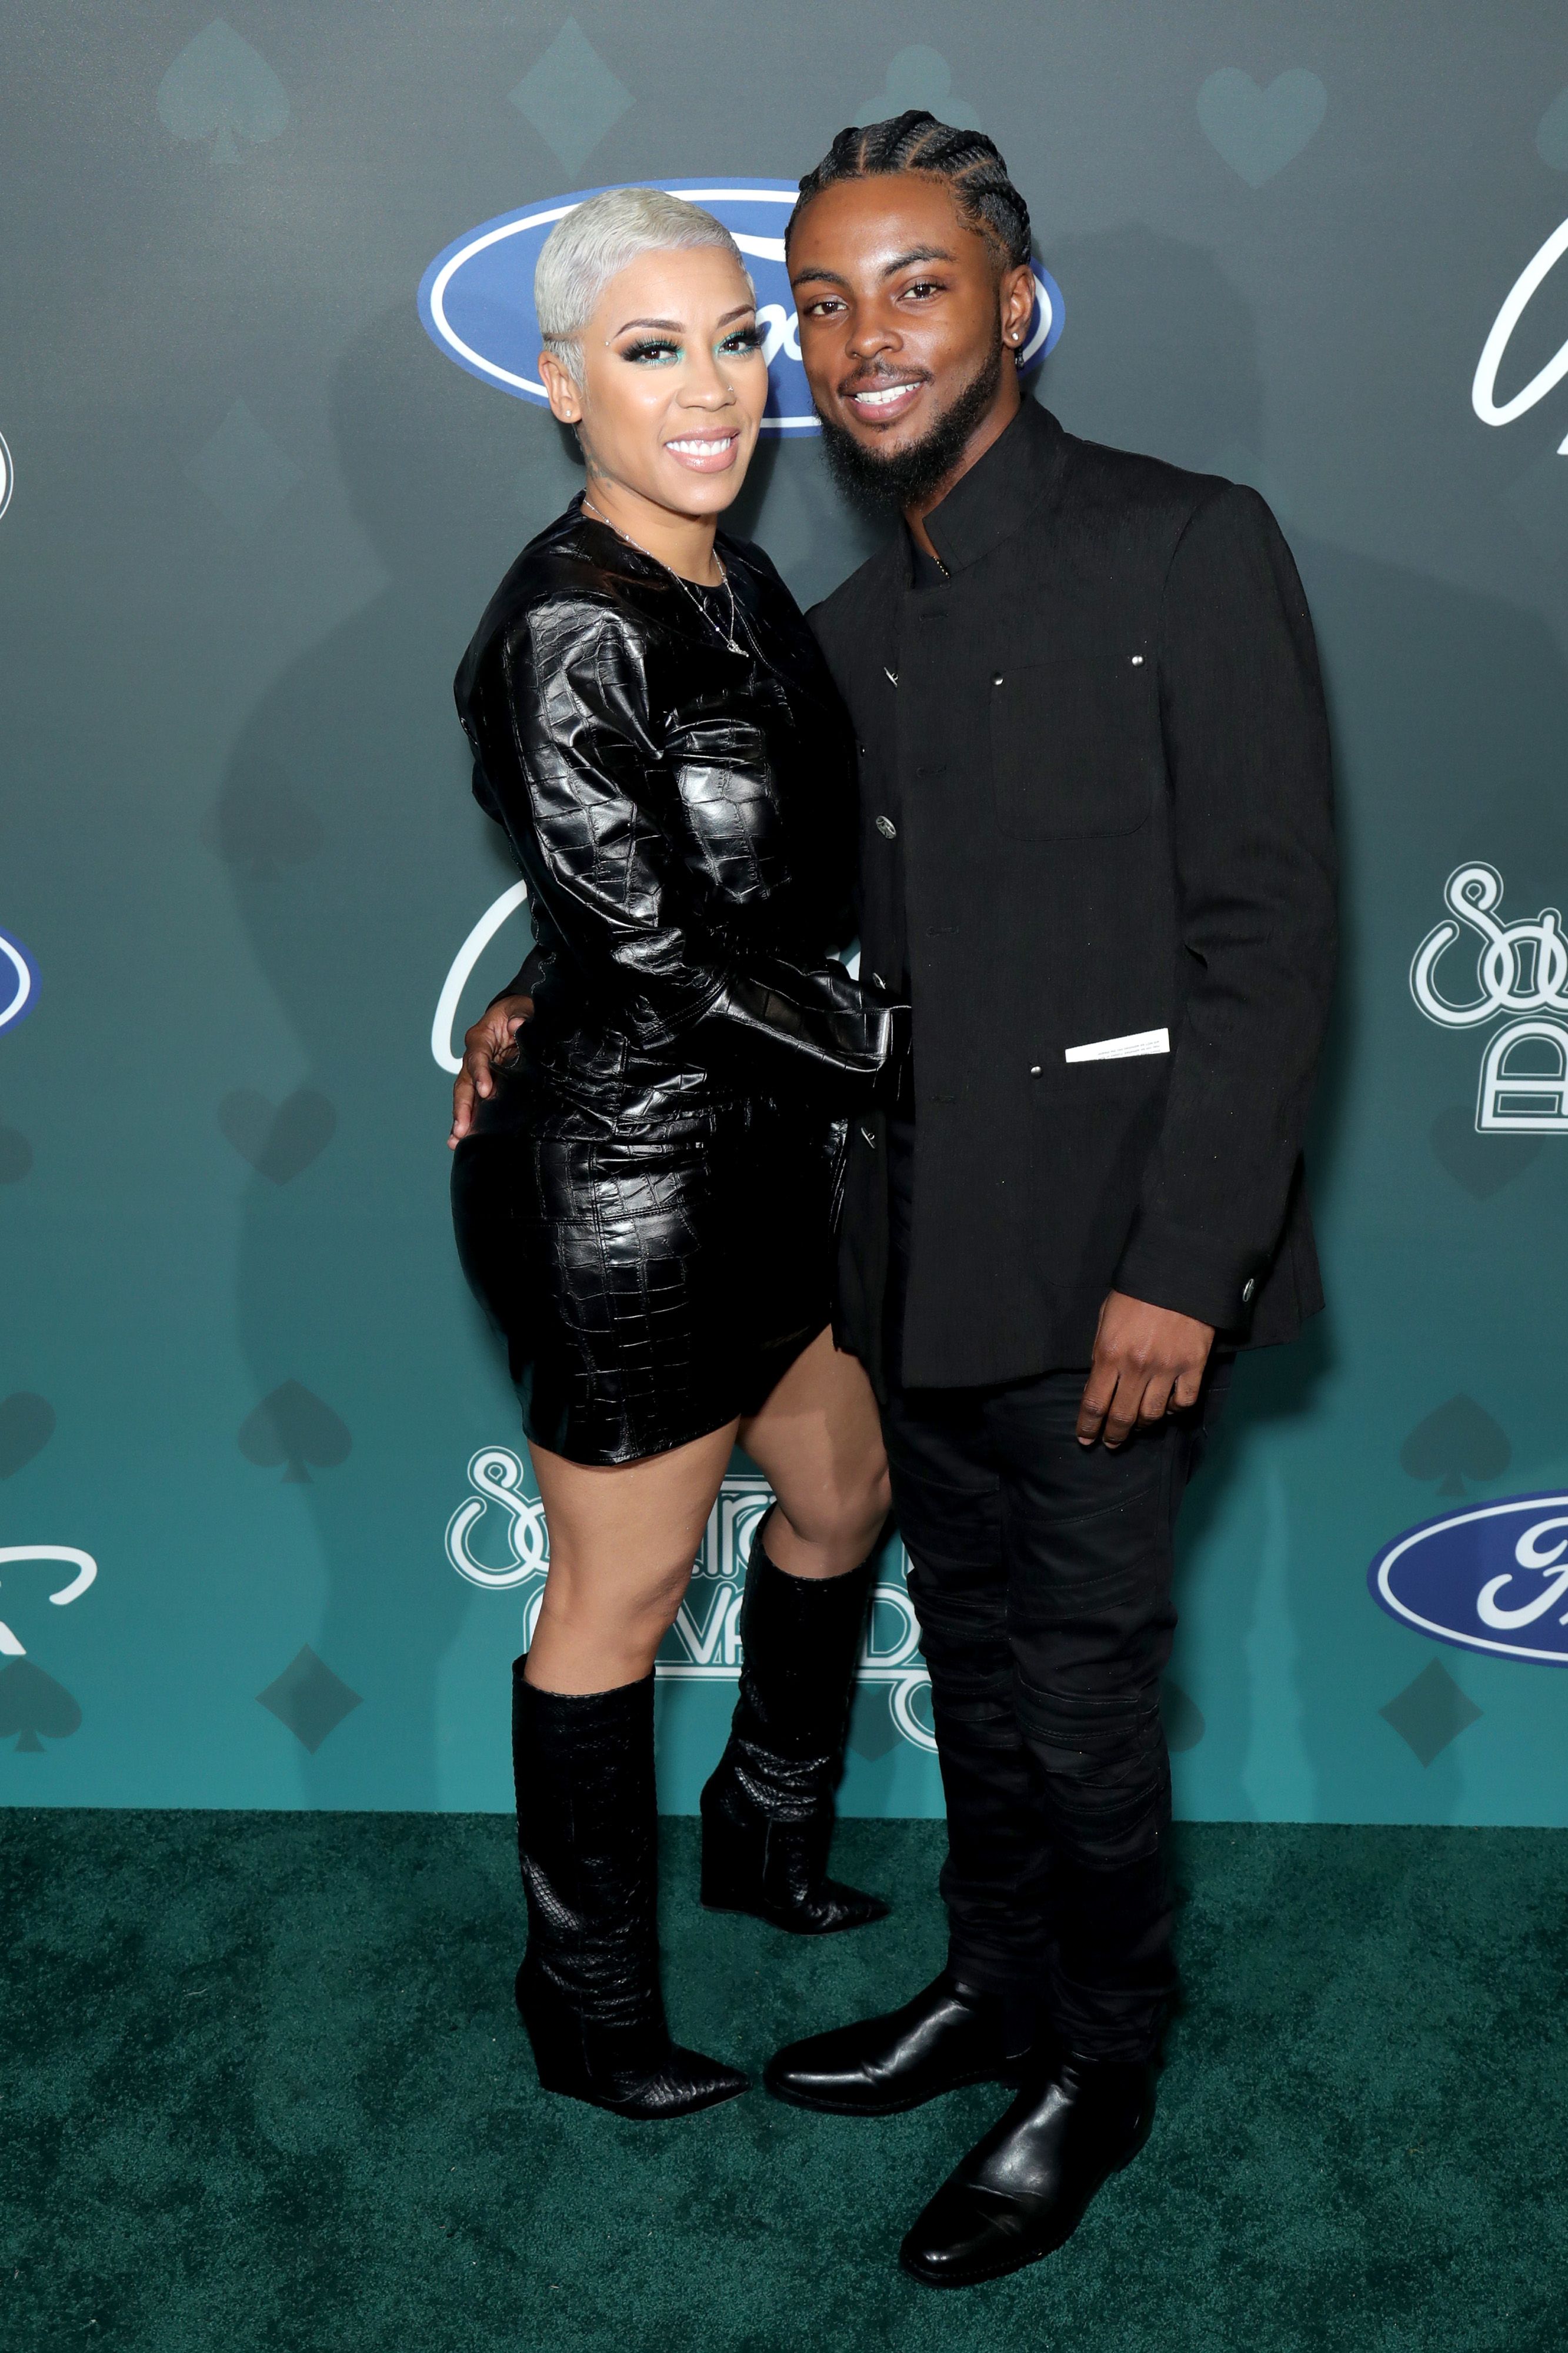 Keyshia Cole and Niko Khale at the 2019 Soul Train Awards at the Orleans Arena on November 17, 2019. | Photo: Getty Images